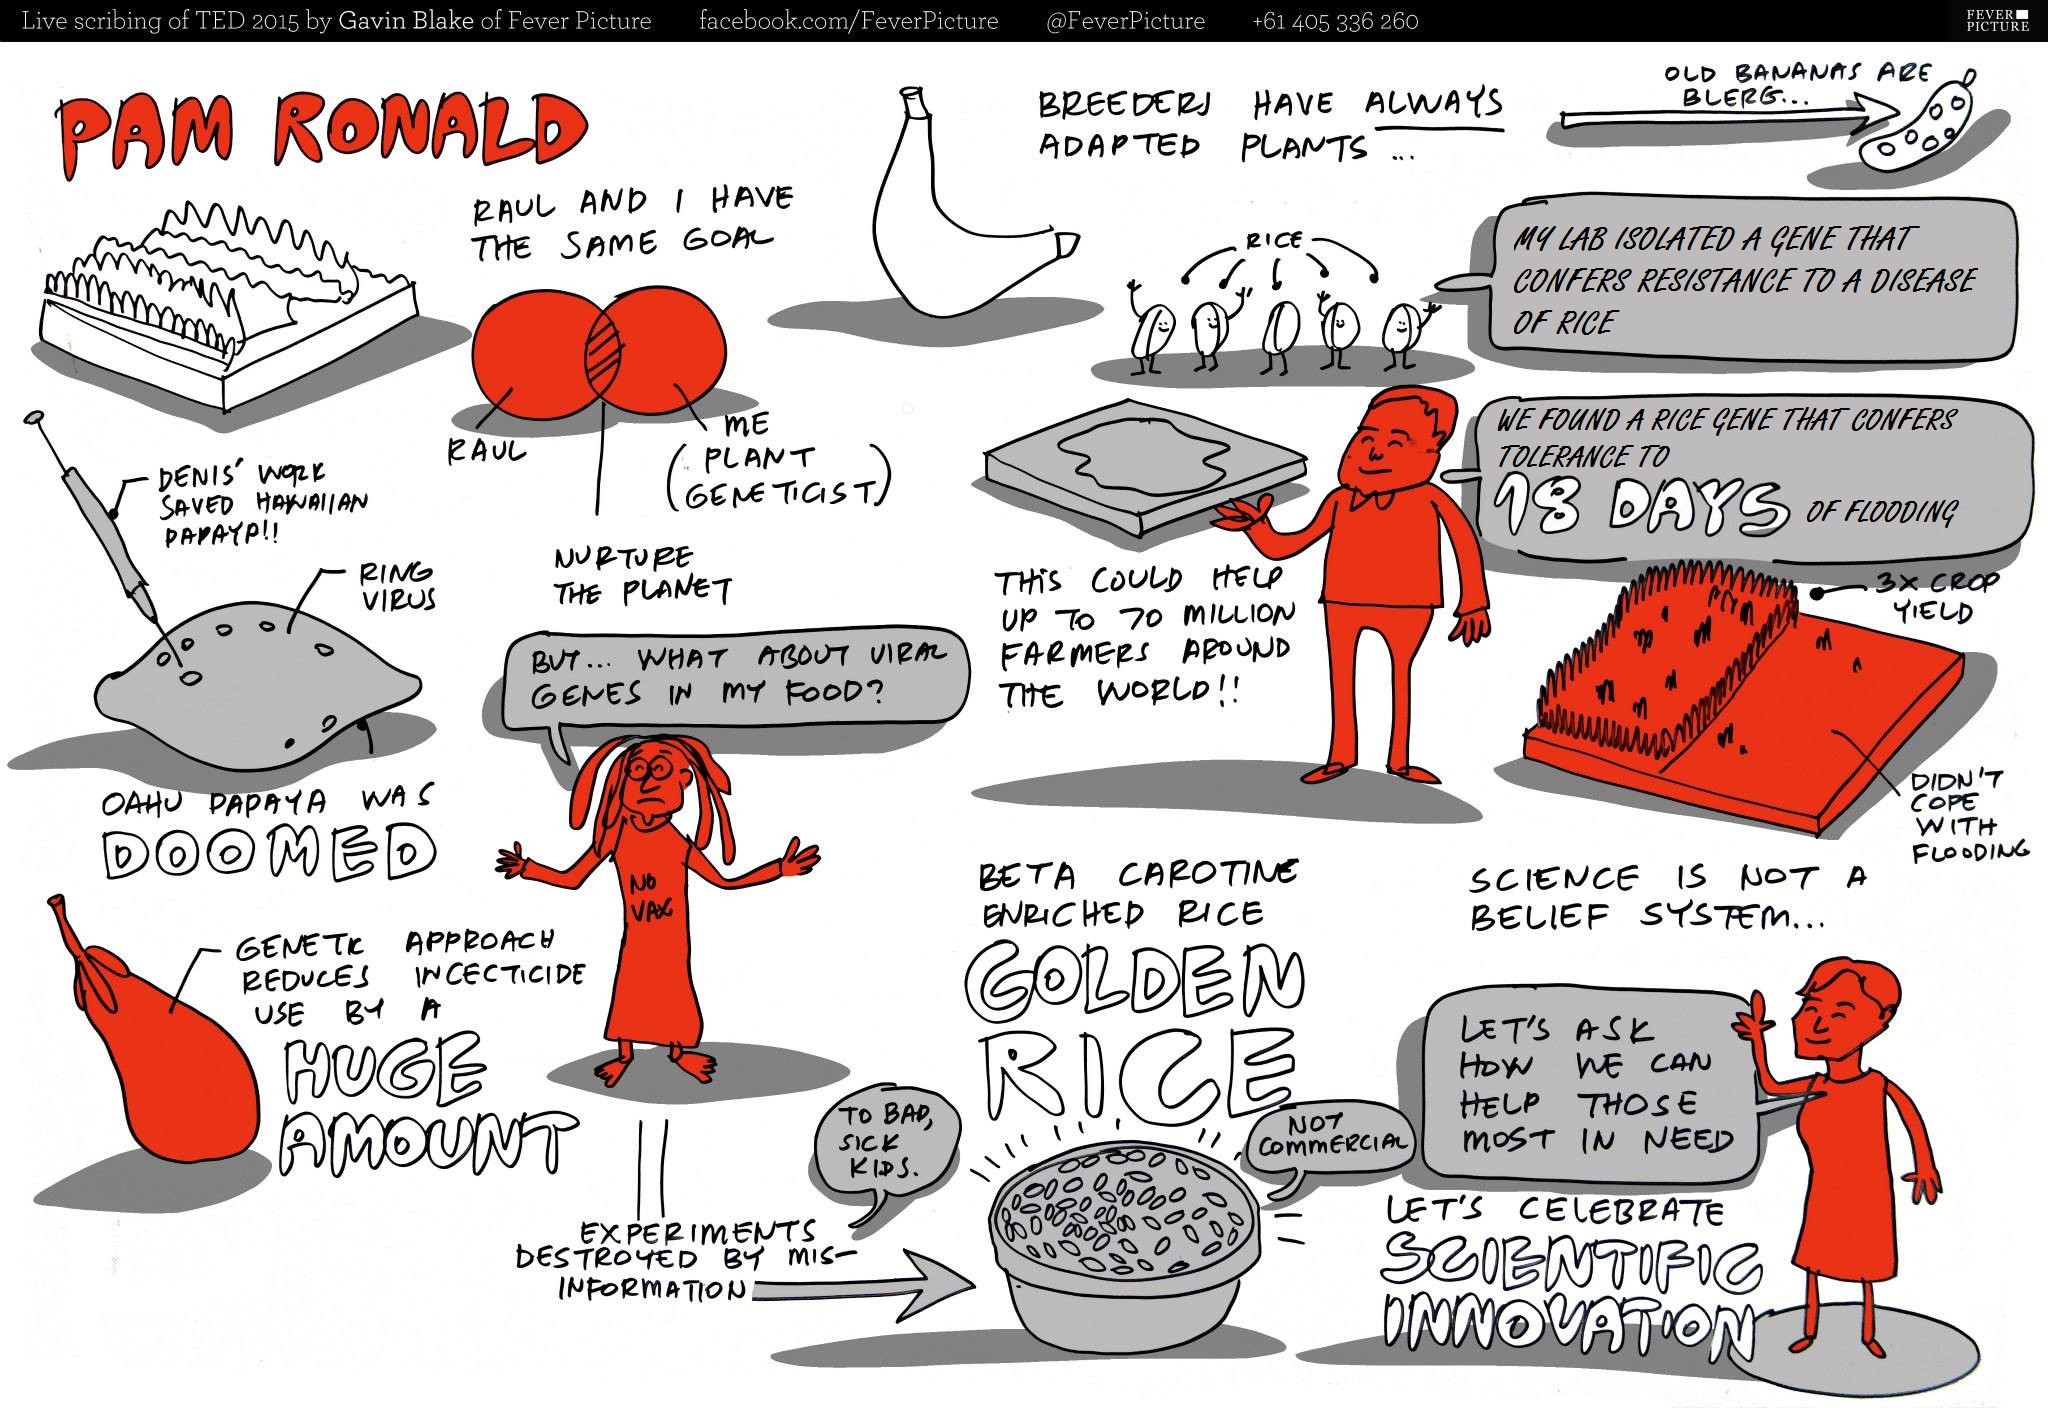 Comic depicting the main ideas from Dr. Pamela Ronald's 2015 TED talk by Gavin Blake, FeverPicture